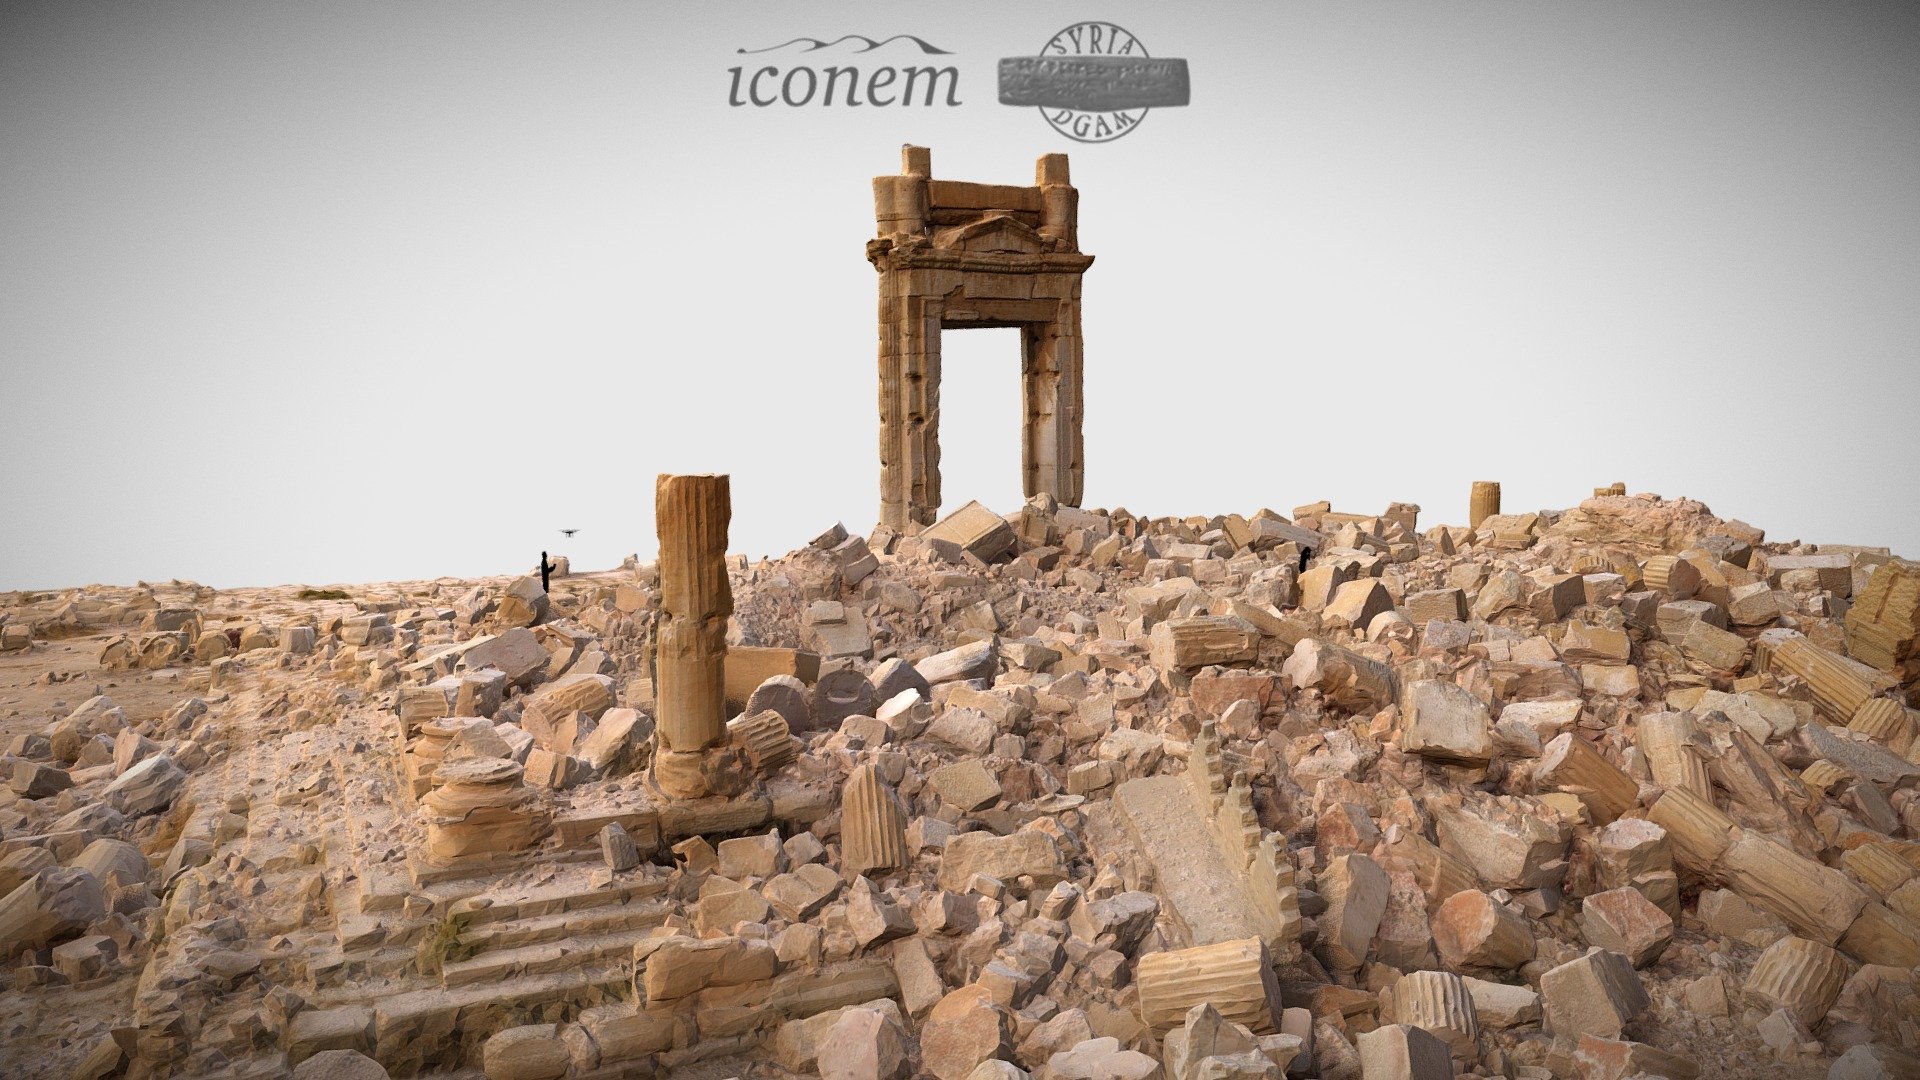 In partnership with the DGAM, the ICONEM’s team was the first one to be in Palmyra since Daesh’s departure. New phase of the major project « Syrian Heritage », this mission has been an opportunity to give a clear picture of the damages suffered by the « pearl of the desert », and more specifically by the Temple of Bel as it has been left behind by Daesh fighters, using photogrammetry. 

The digitalized 3D model allows us to observe the existence of stone blocs remaining almost intact, meaning that there might be some hope for a partial reconstruction. Some other blocs however have been dynamited.  

ICONEM’s support in Palmyra has been found essential in order to document the appearance and state of the site right after it’s liberation, which is going to be helpful to the scientific community. Dedicated in 32 AD and consecrated to the protective divinity of Palmyra, the Mesopotamian god Bel, the Temple of Bel was before its destruction one of the best preserved antique temples of Syria 3d model